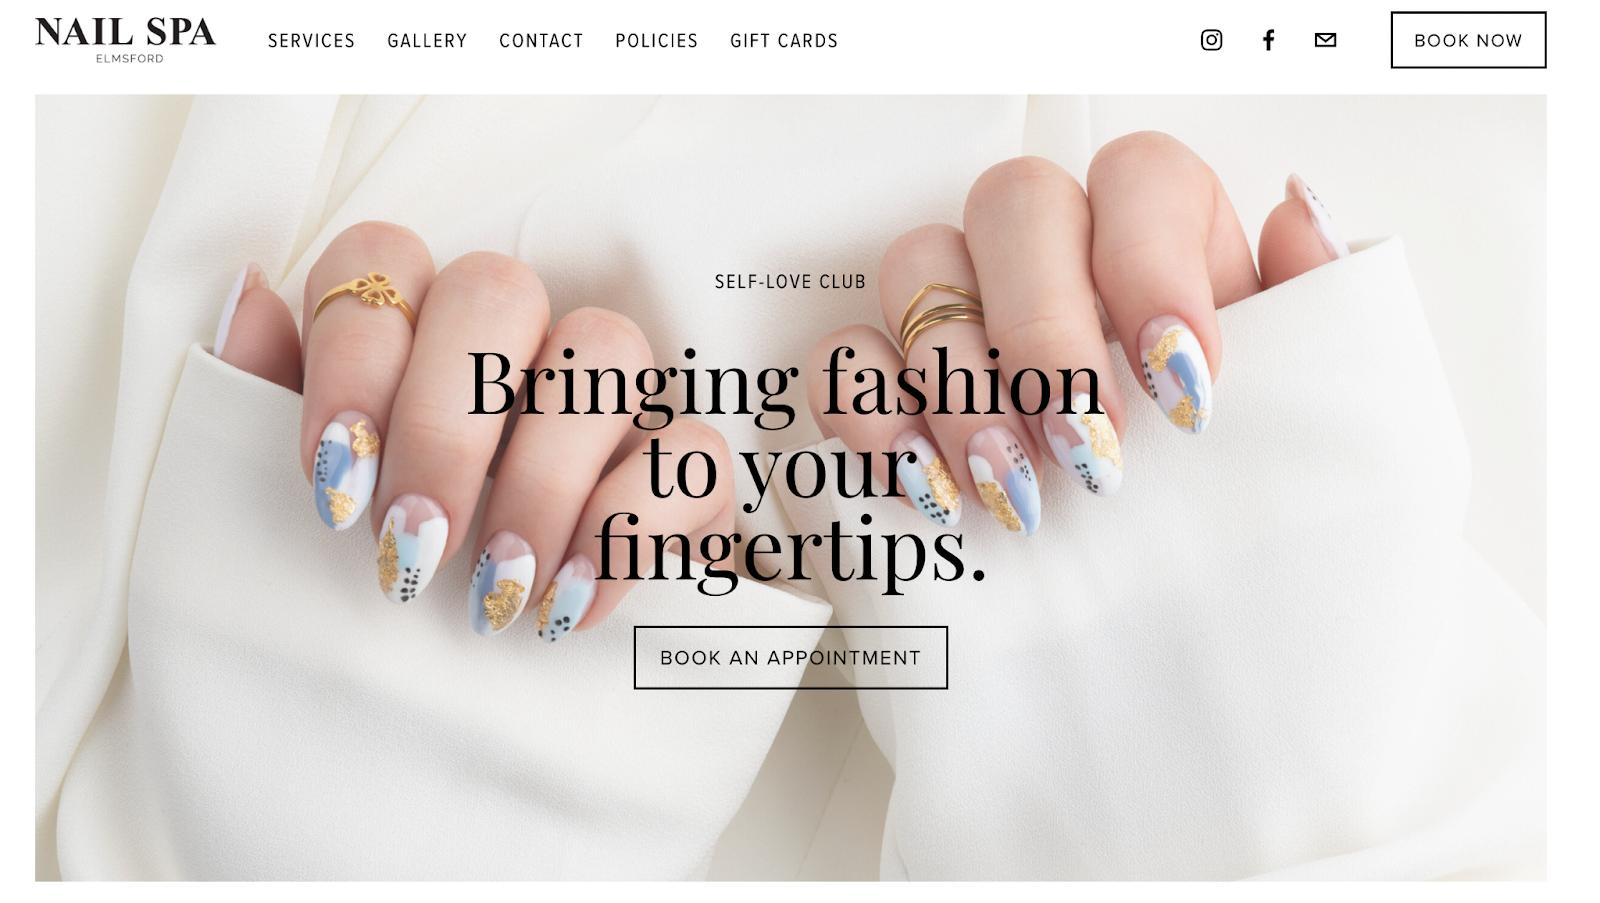 2. "Sleek and Chic: Modern Nail Salon Website Design" by Squarespace - wide 6